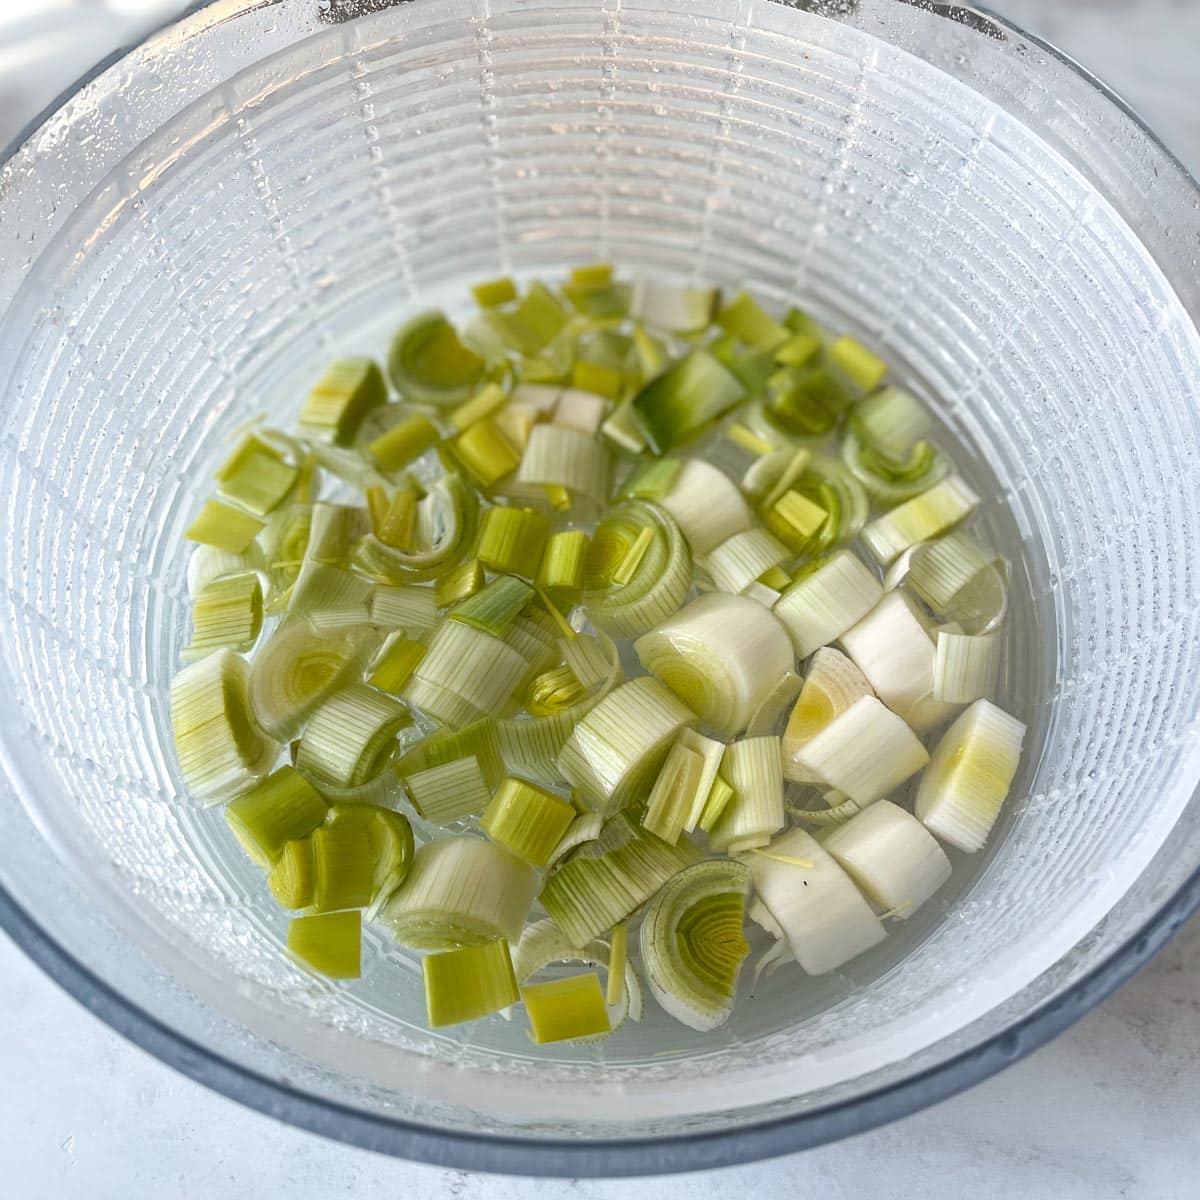 Sliced leeks are shown soaking in water in a salad spinner.